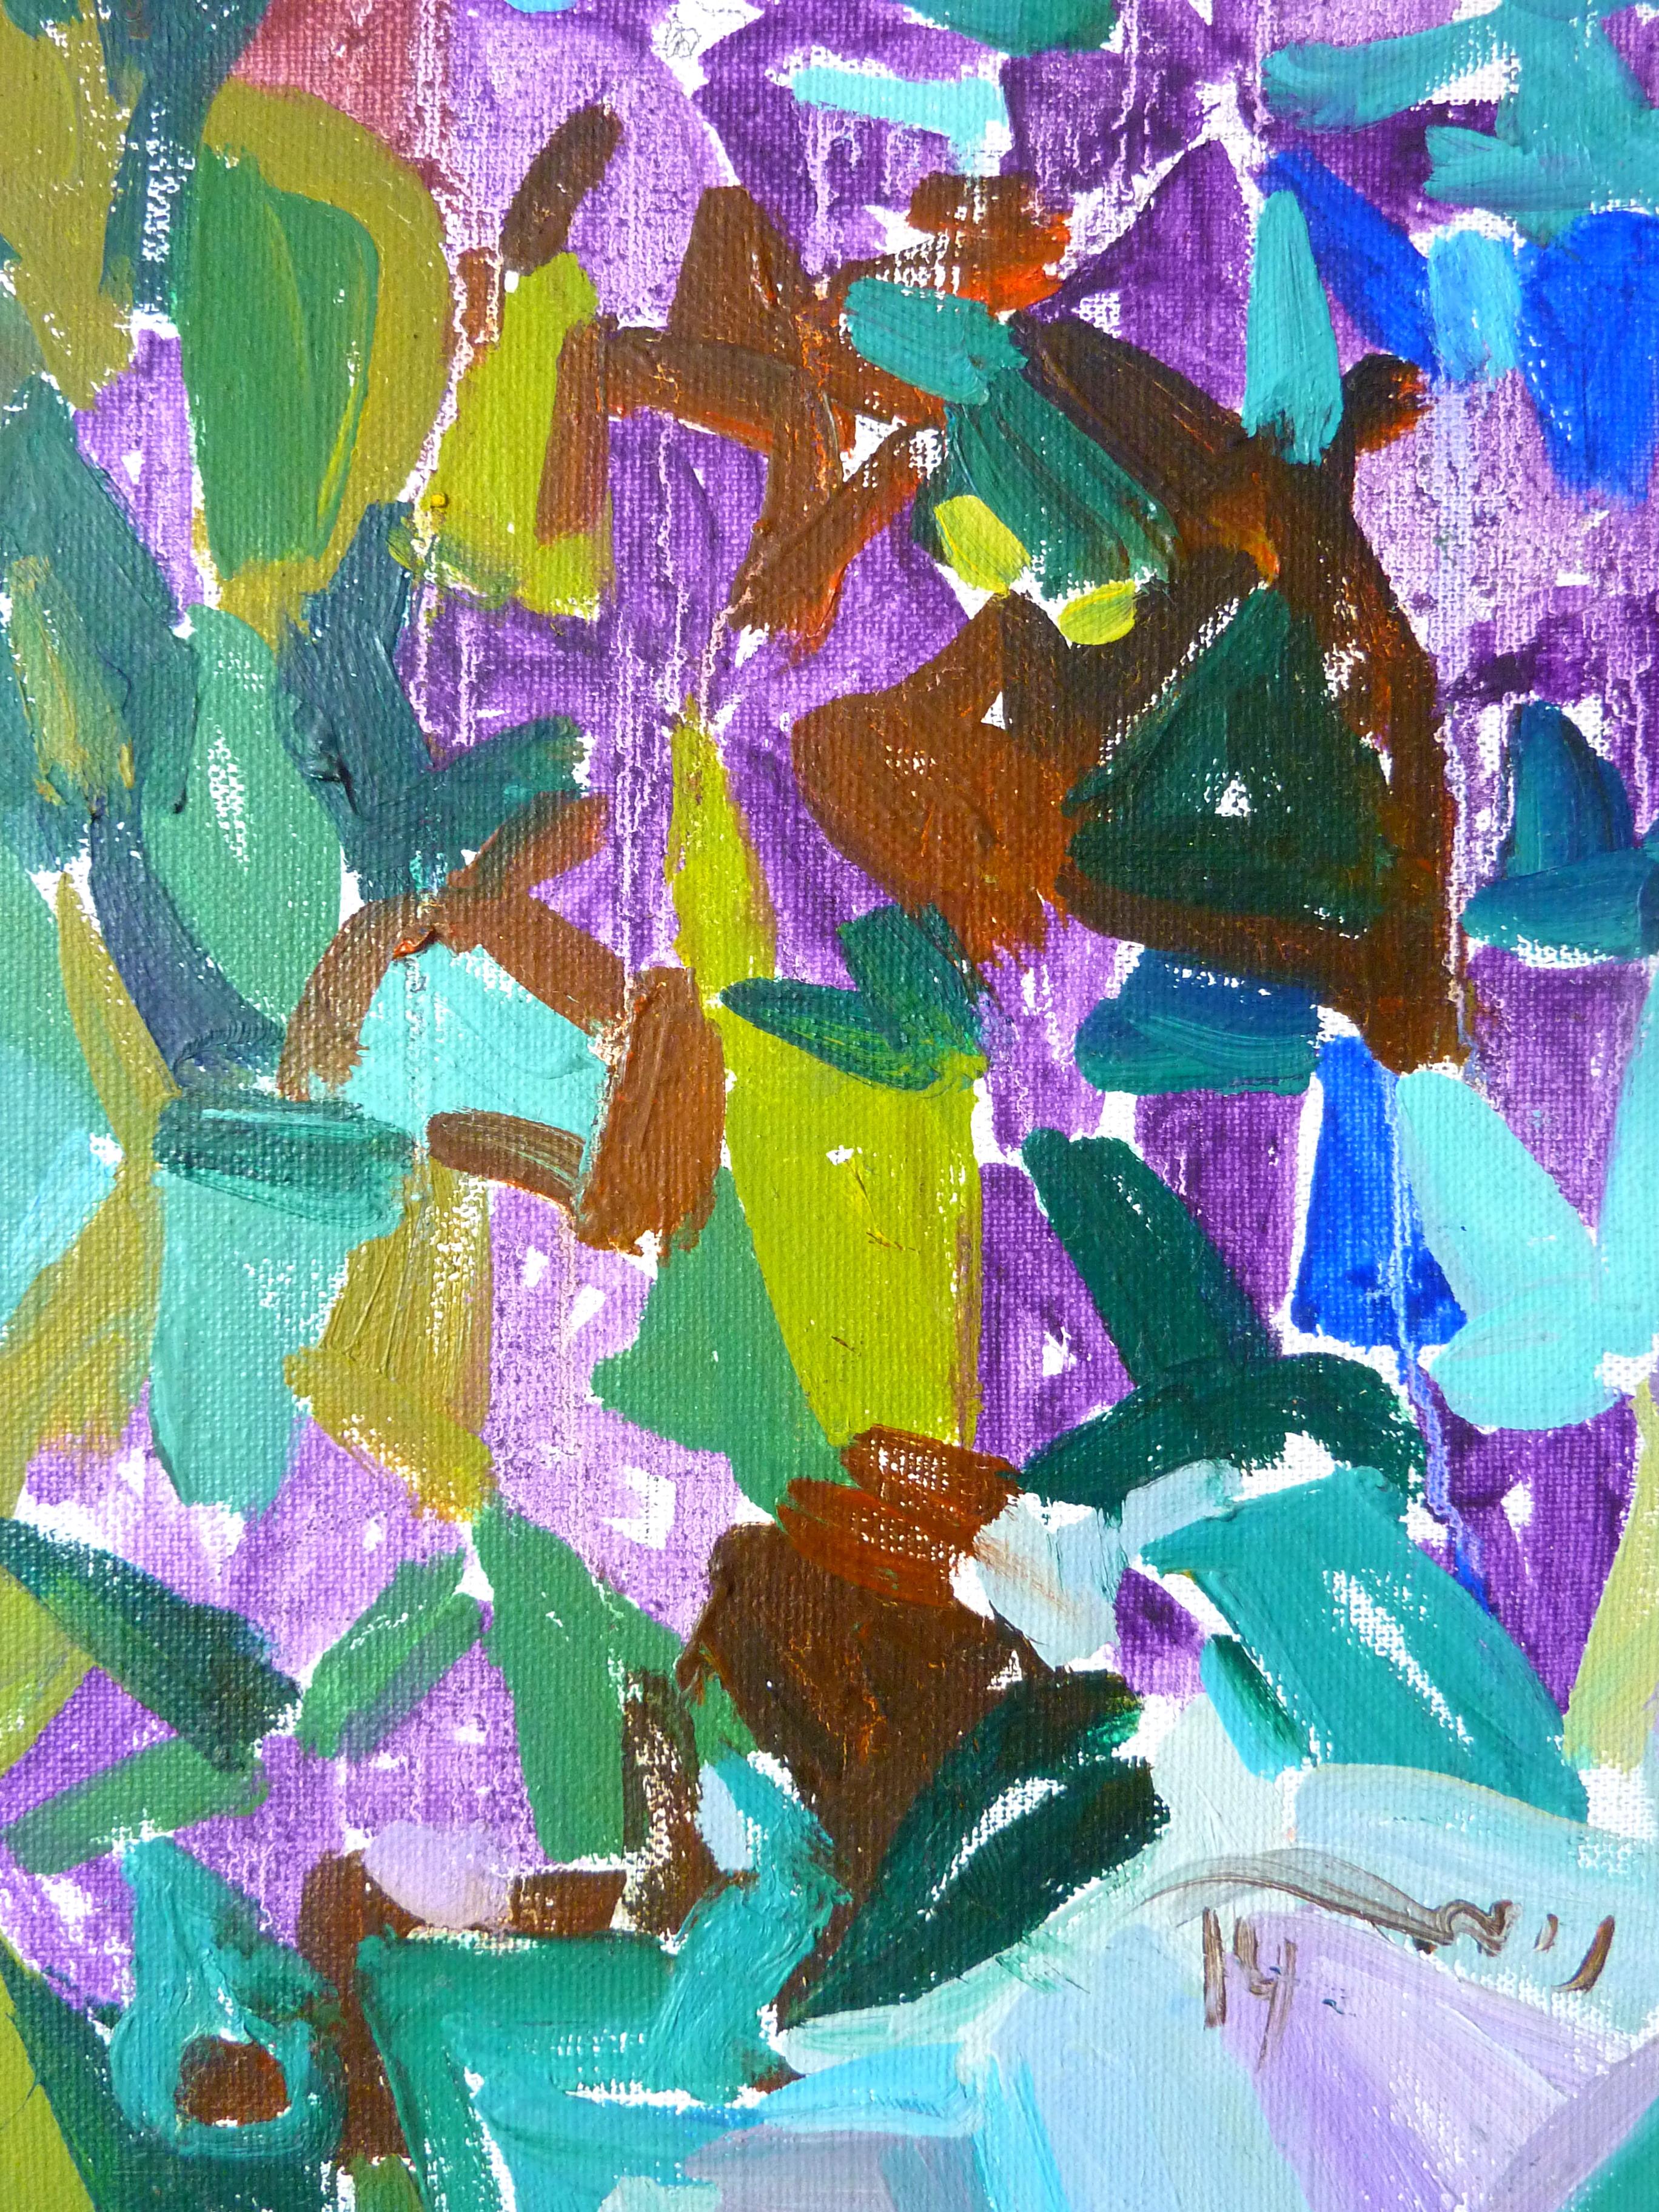 Violet Harmony - 21st Century Contemporary Bright Cubism Nature Oil Painting - Gray Landscape Painting by Nikol Klampert